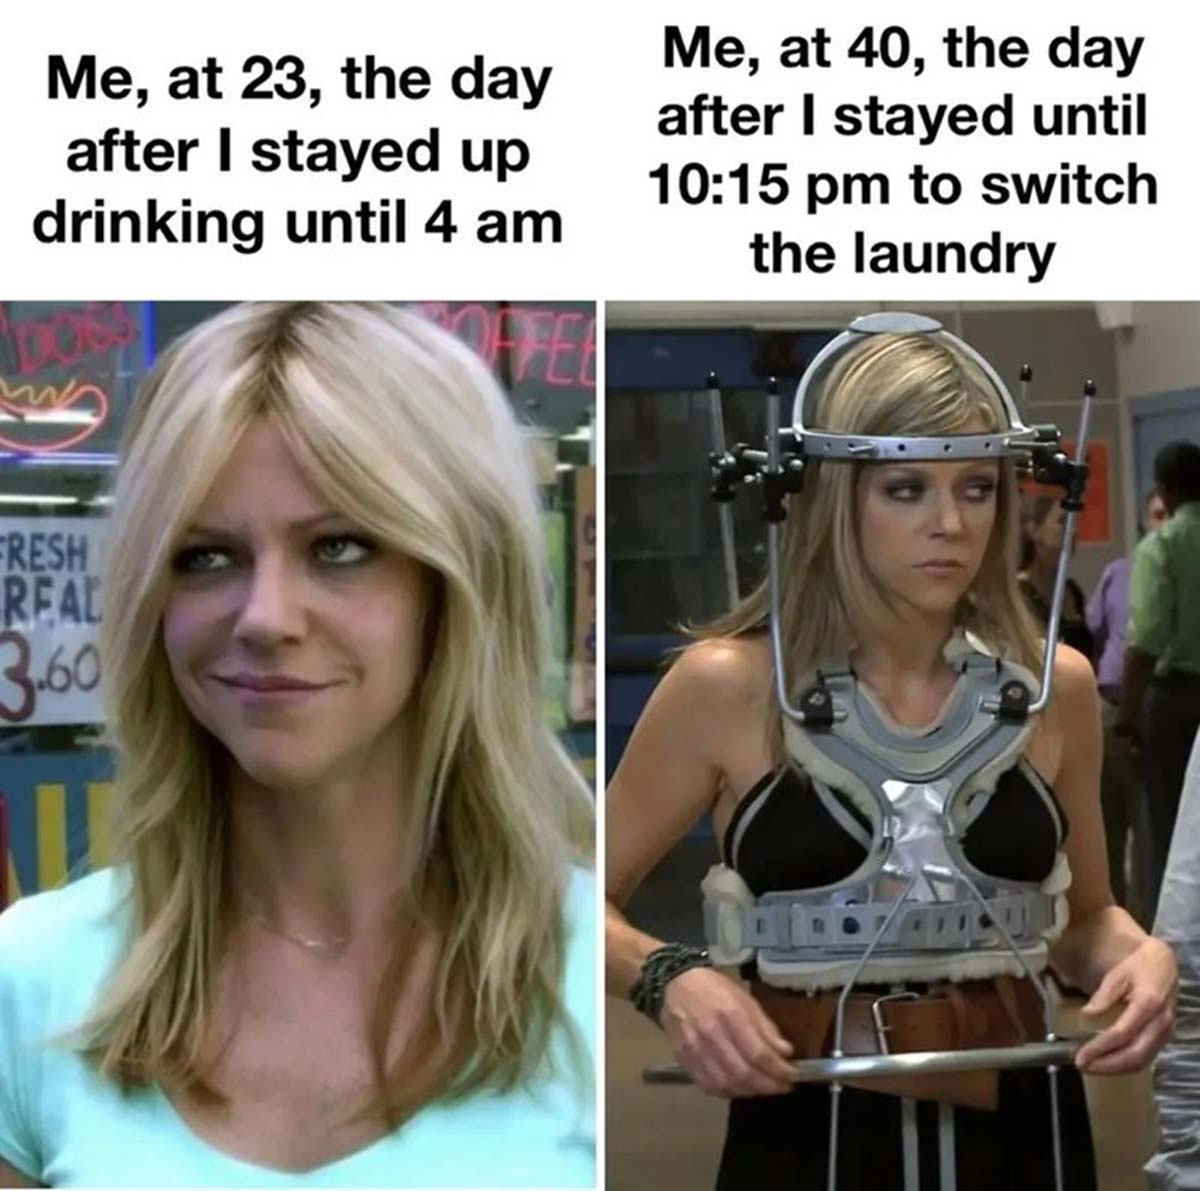 it's always sunny in philadelphia dee smile - Me, at 23, the day after I stayed up drinking until 4 am Fe Me, at 40, the day after I stayed until to switch the laundry Fresh Real 3.60